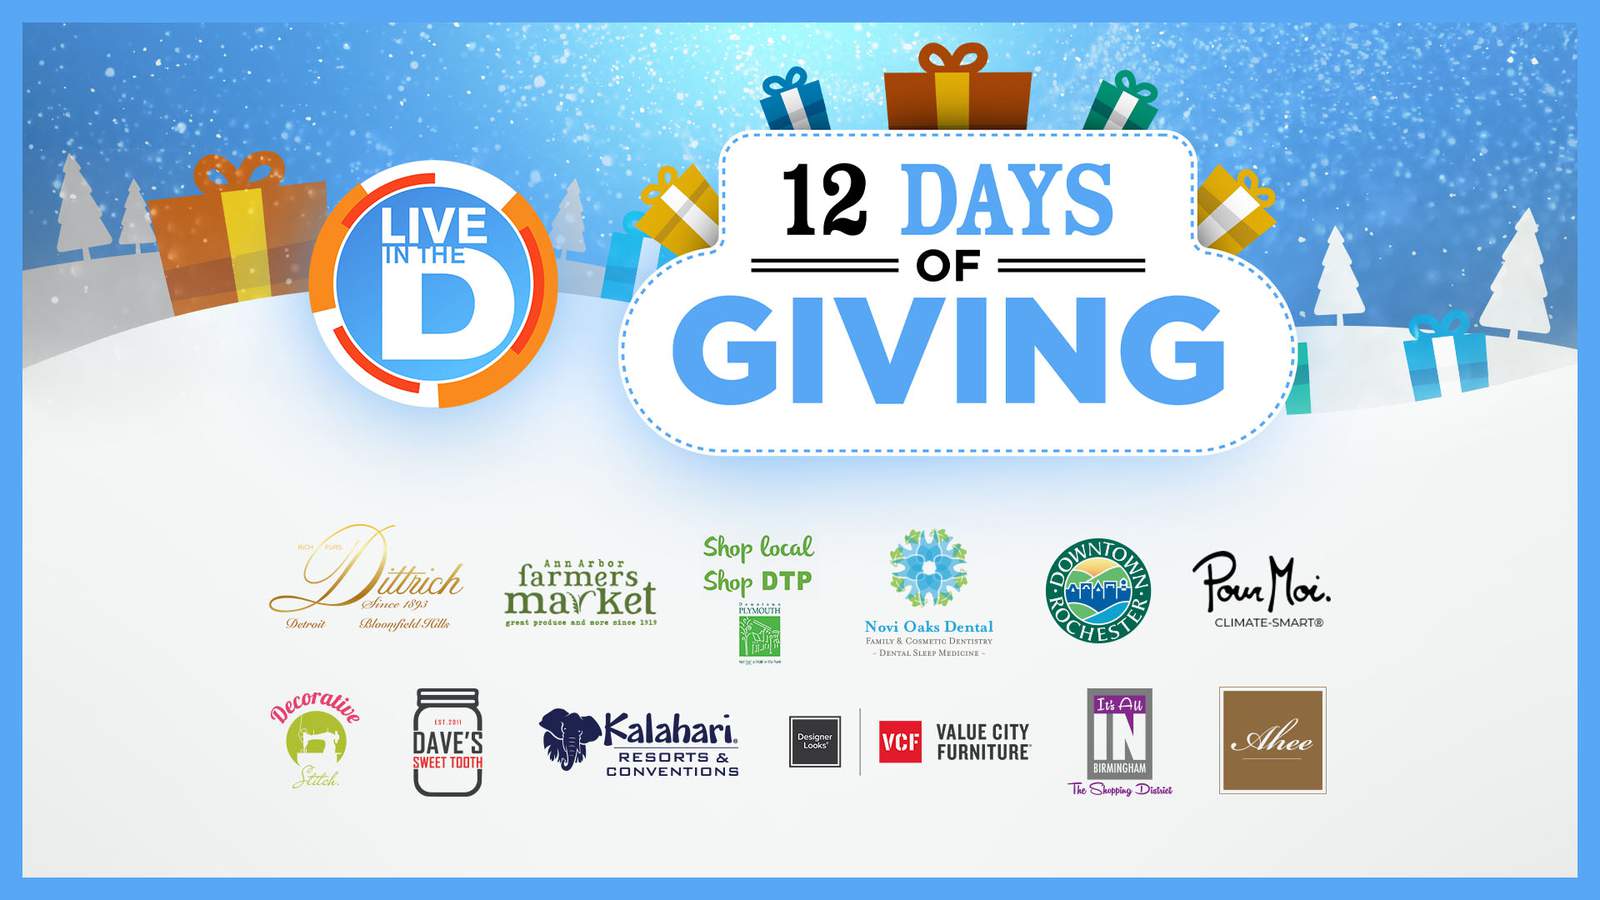 Today’s the final day of our 12 Days of Giving to make your holidays brighter